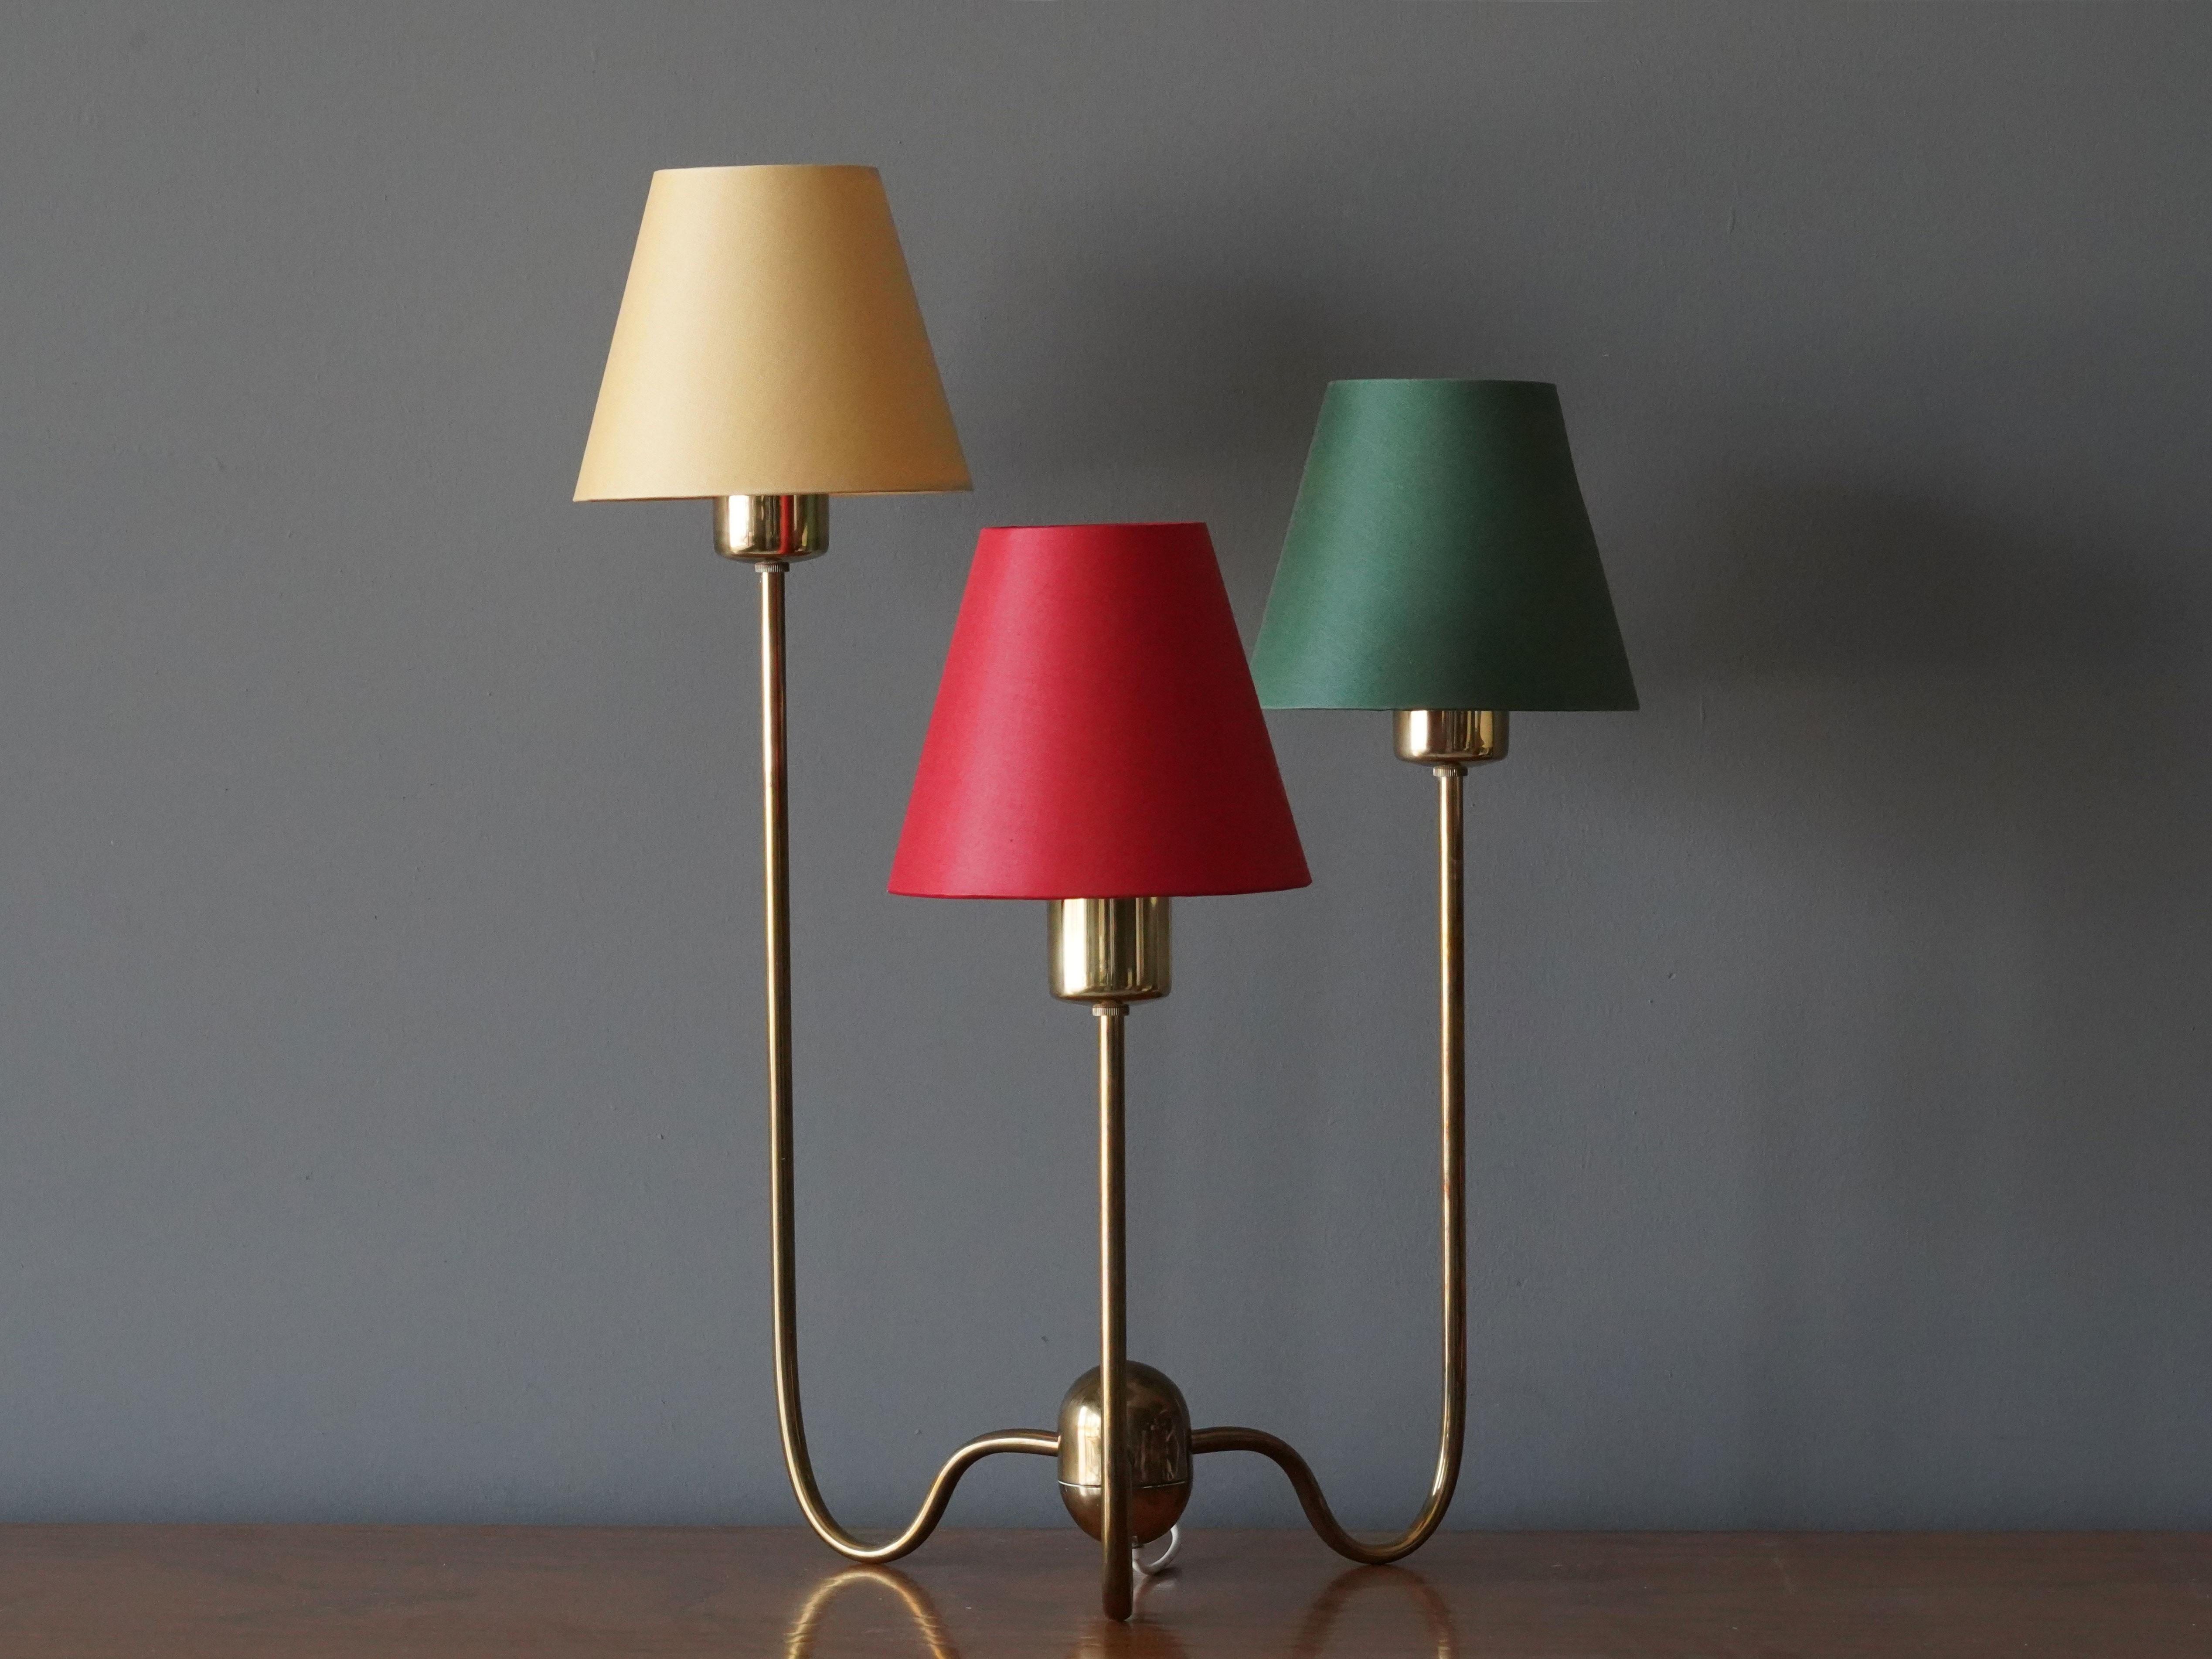 An early example of Josef Franks 3-armed table lamp for Svenskt Tenn, Stockholm, Sweden, circa 1960s.

Other lighting designers of the period include Paavo Tynell, Alvar Aalto, Serge Muille, and Angelo Lelii.